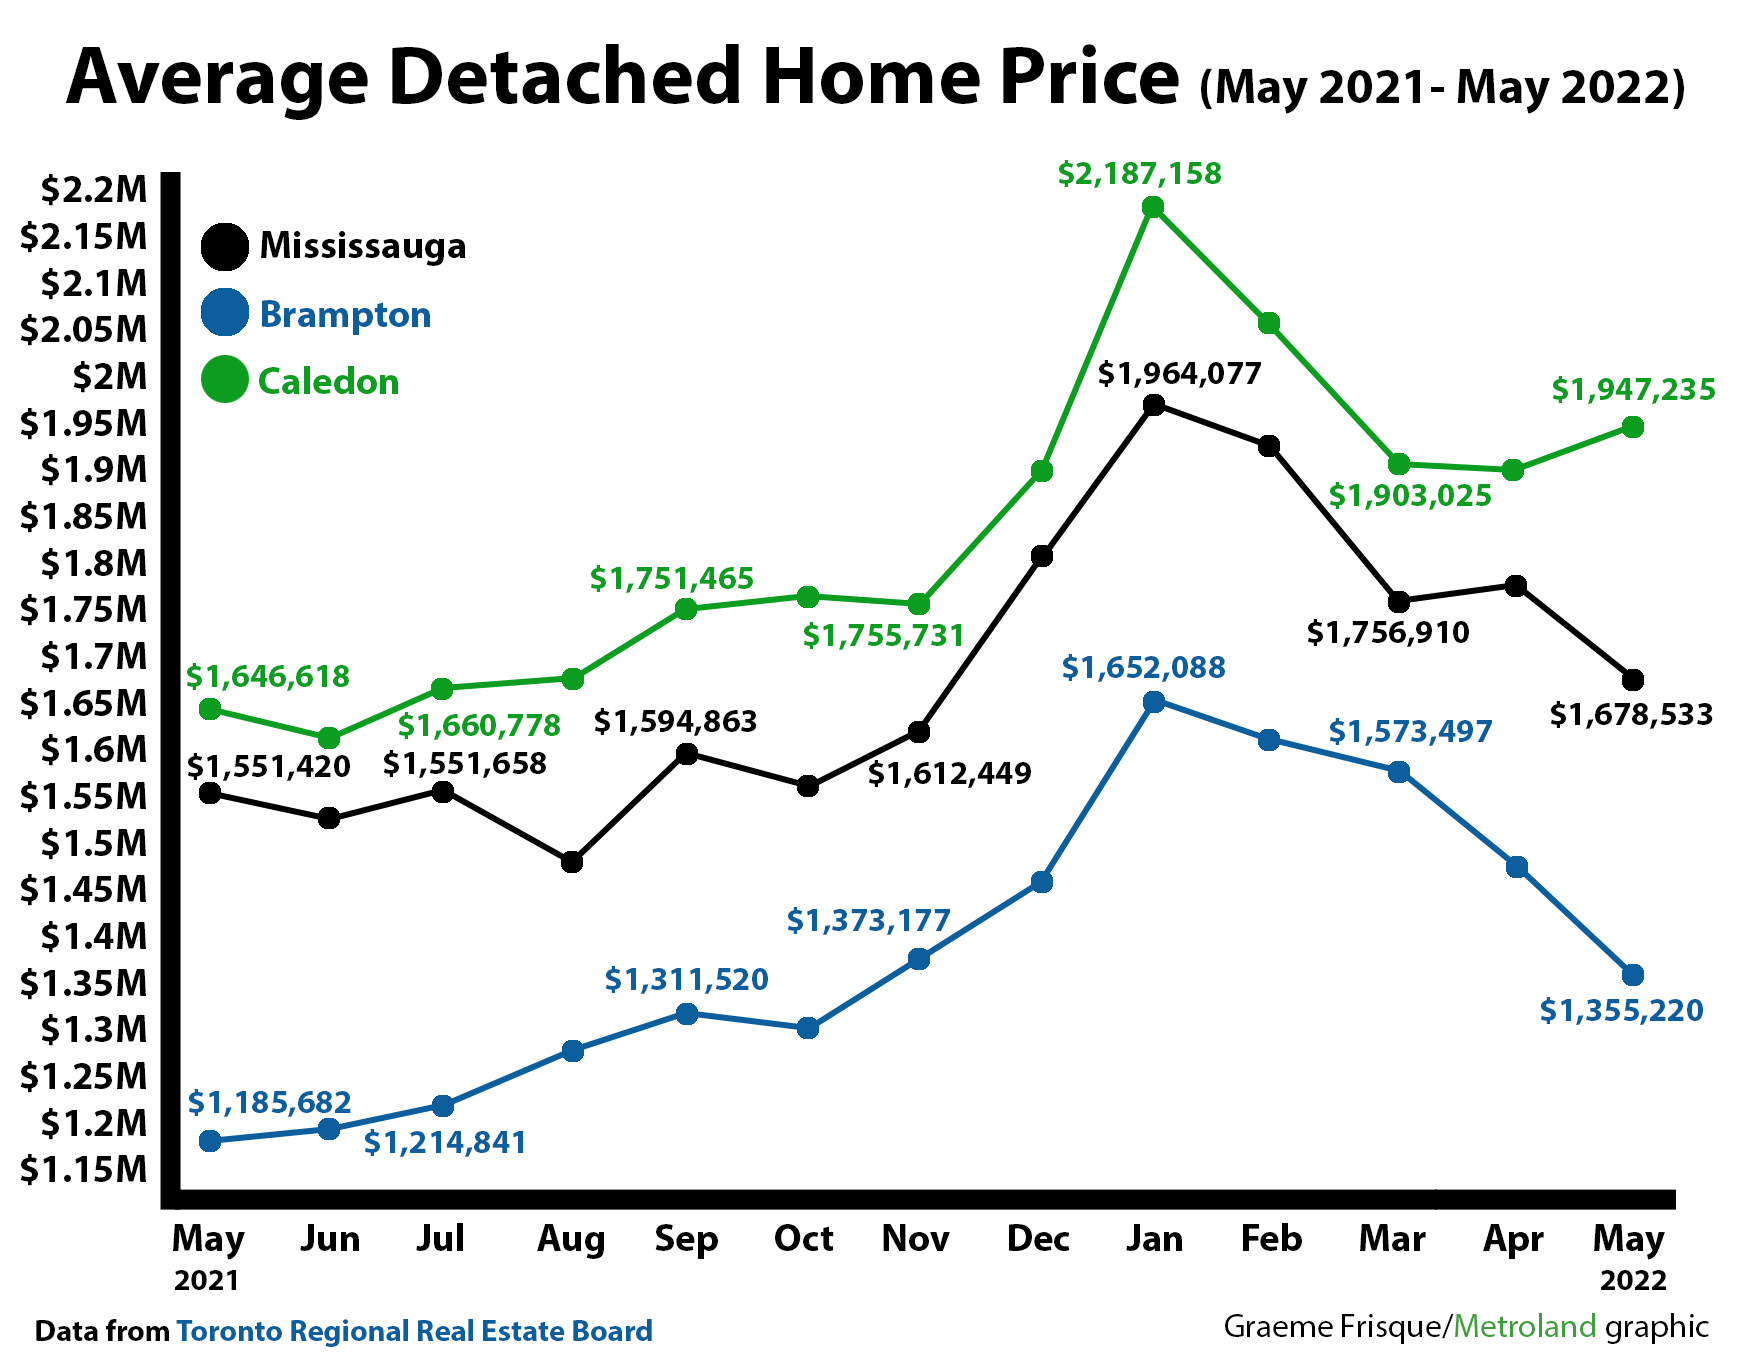 Peel detached home prices graph